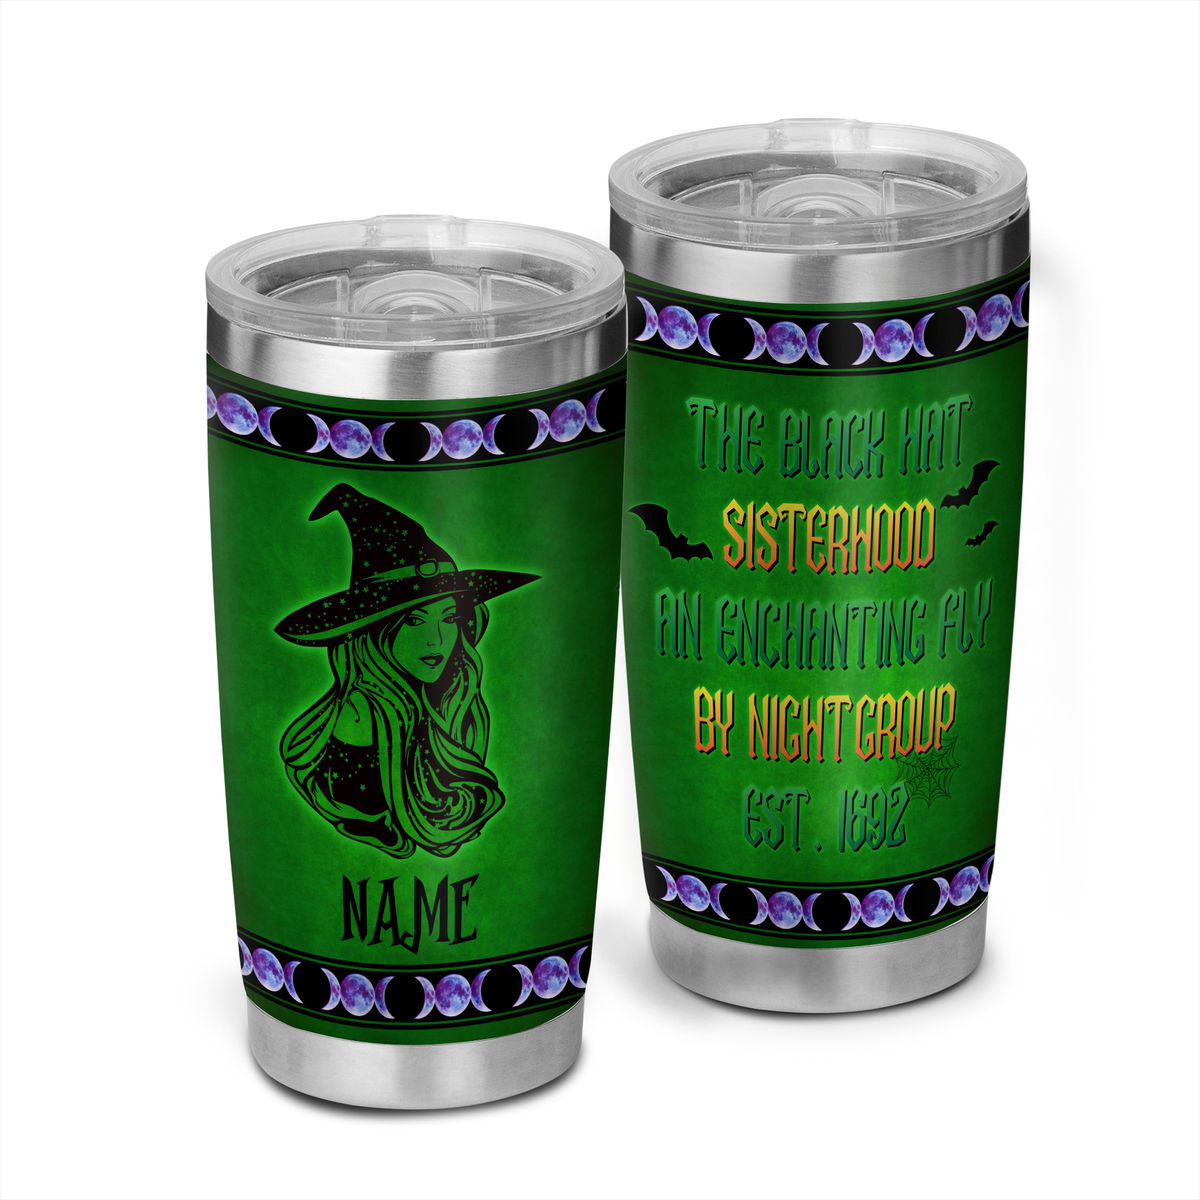 BE A WITCH - Halloween Witches 20oz skinny tumbler New custom made Stainless steel coffee cup mug 37059 37063 - Personalized Tumbler_1